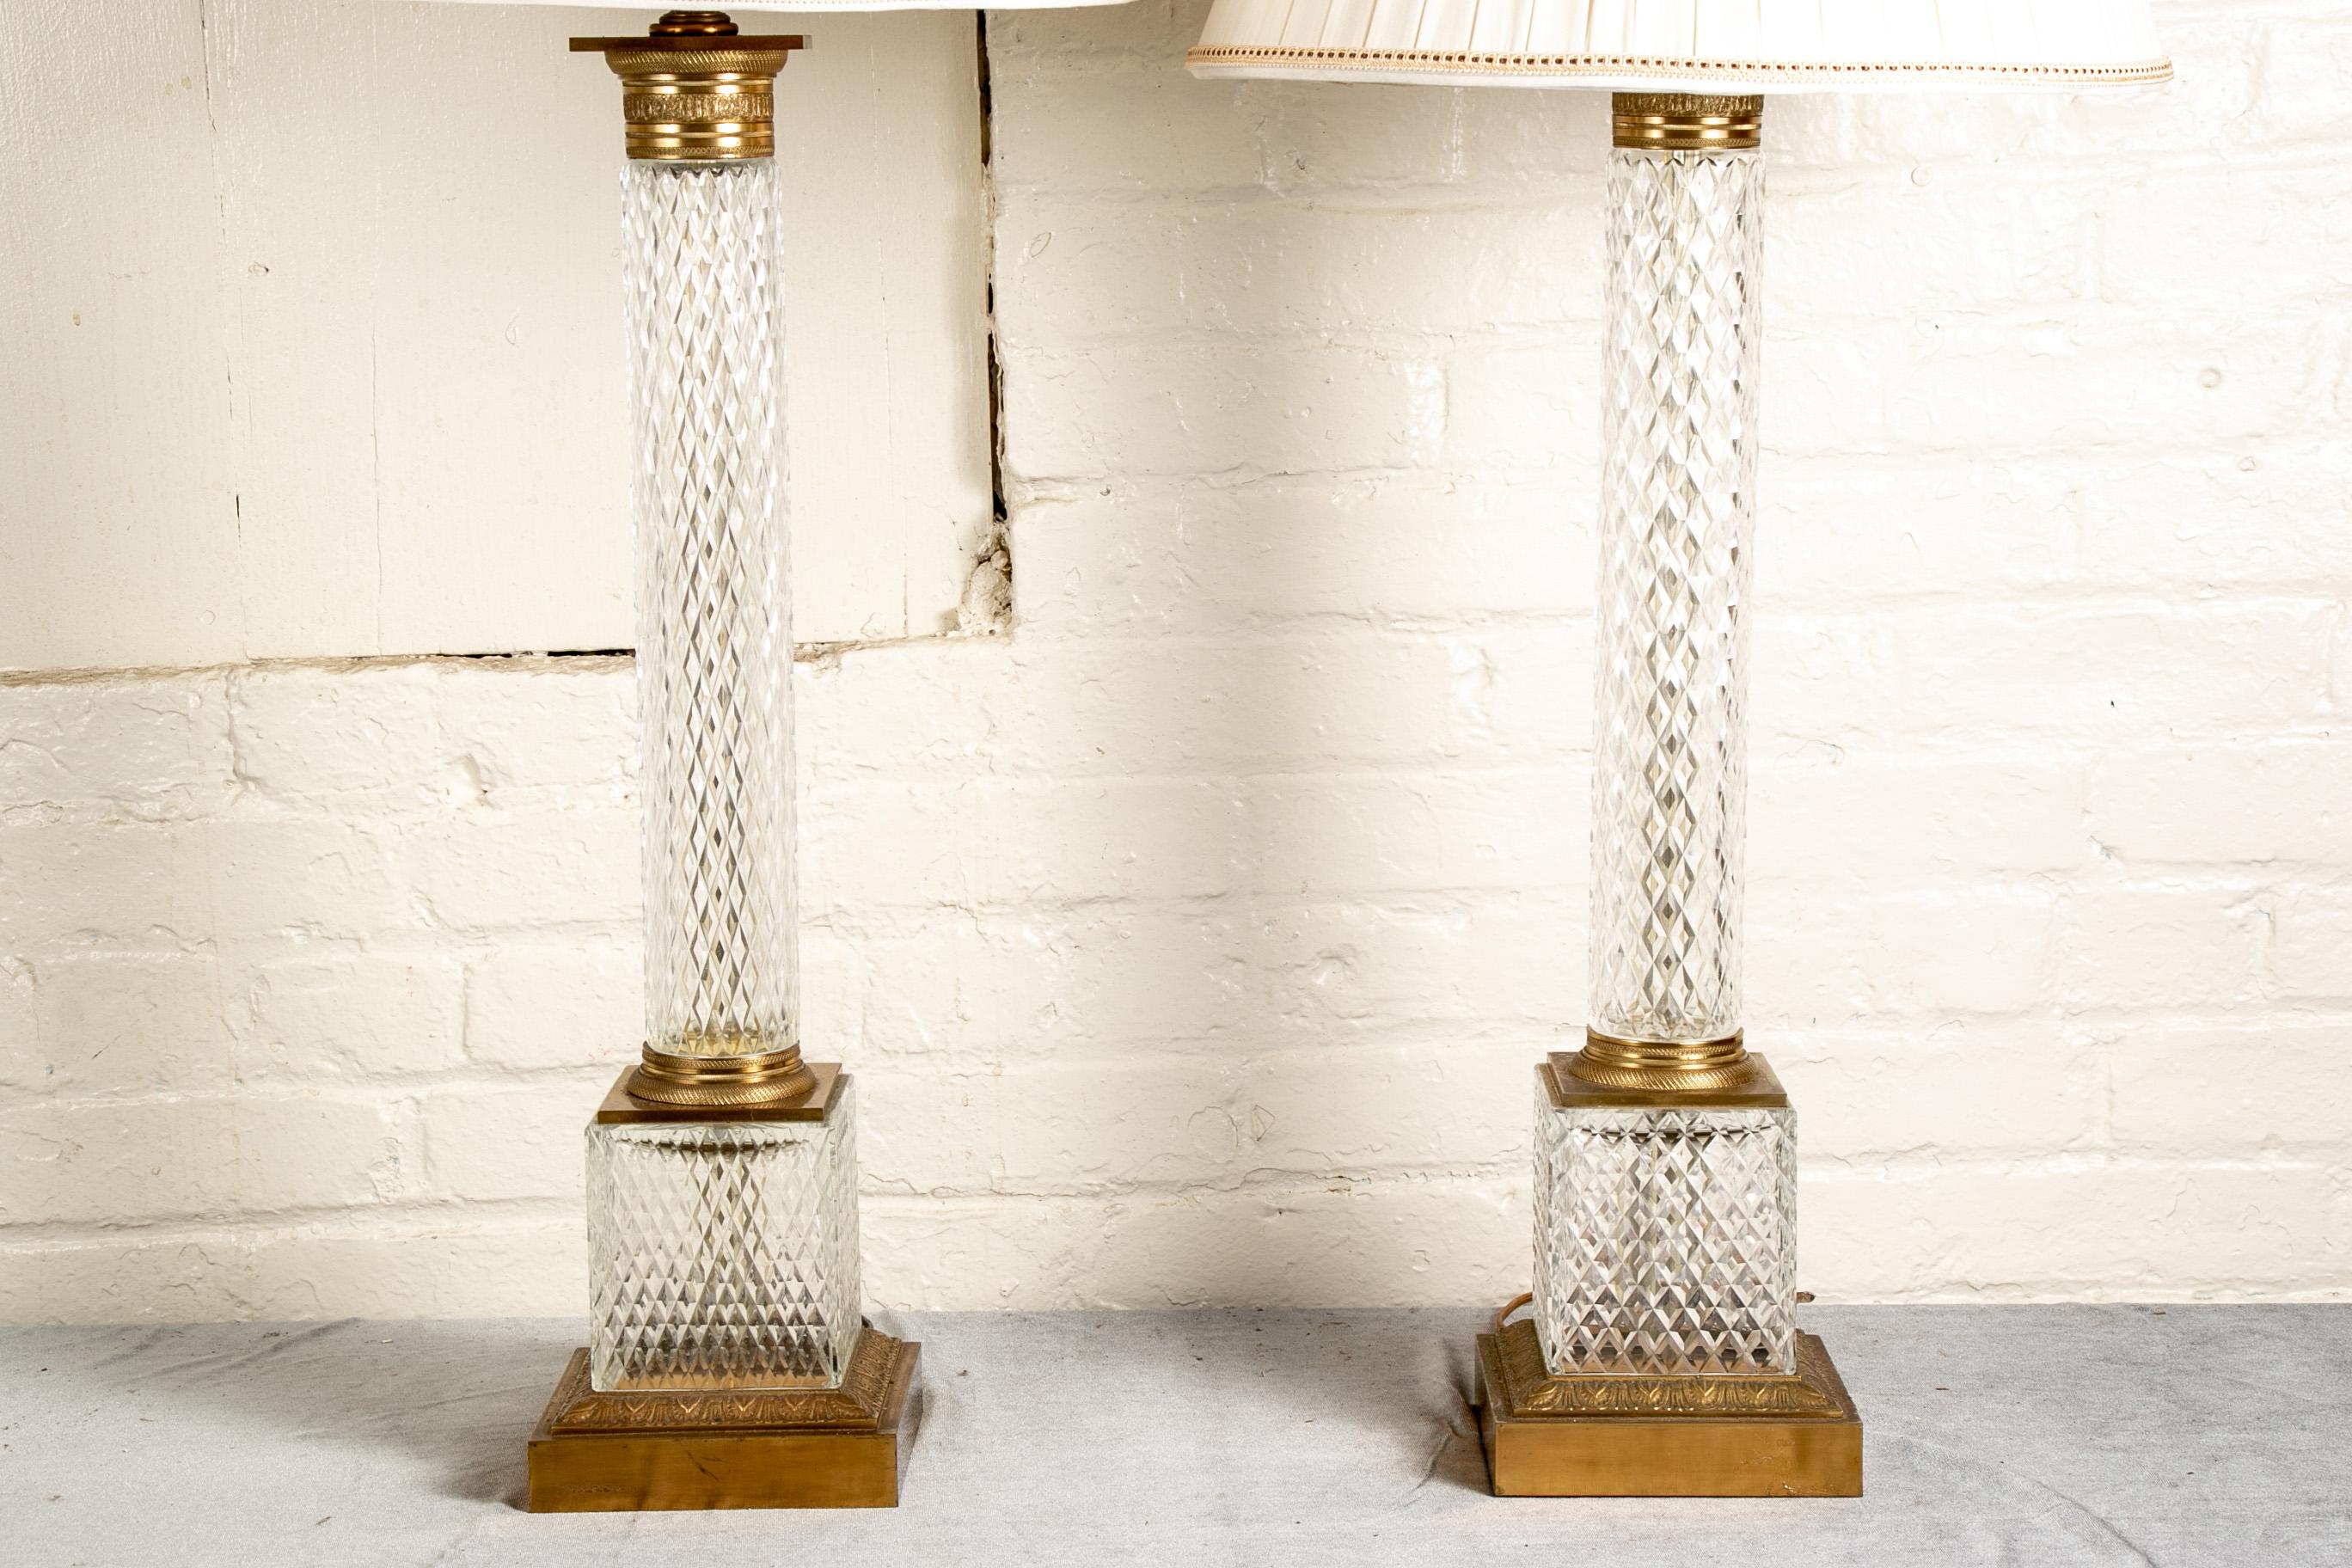 Pair of large scale cut crystal column lamps, overall cut diamond pattern columns and plinths with bronze mounts. The column collars and bases with finely cast details, the square bases with leafy bands in relief. White silk pleated